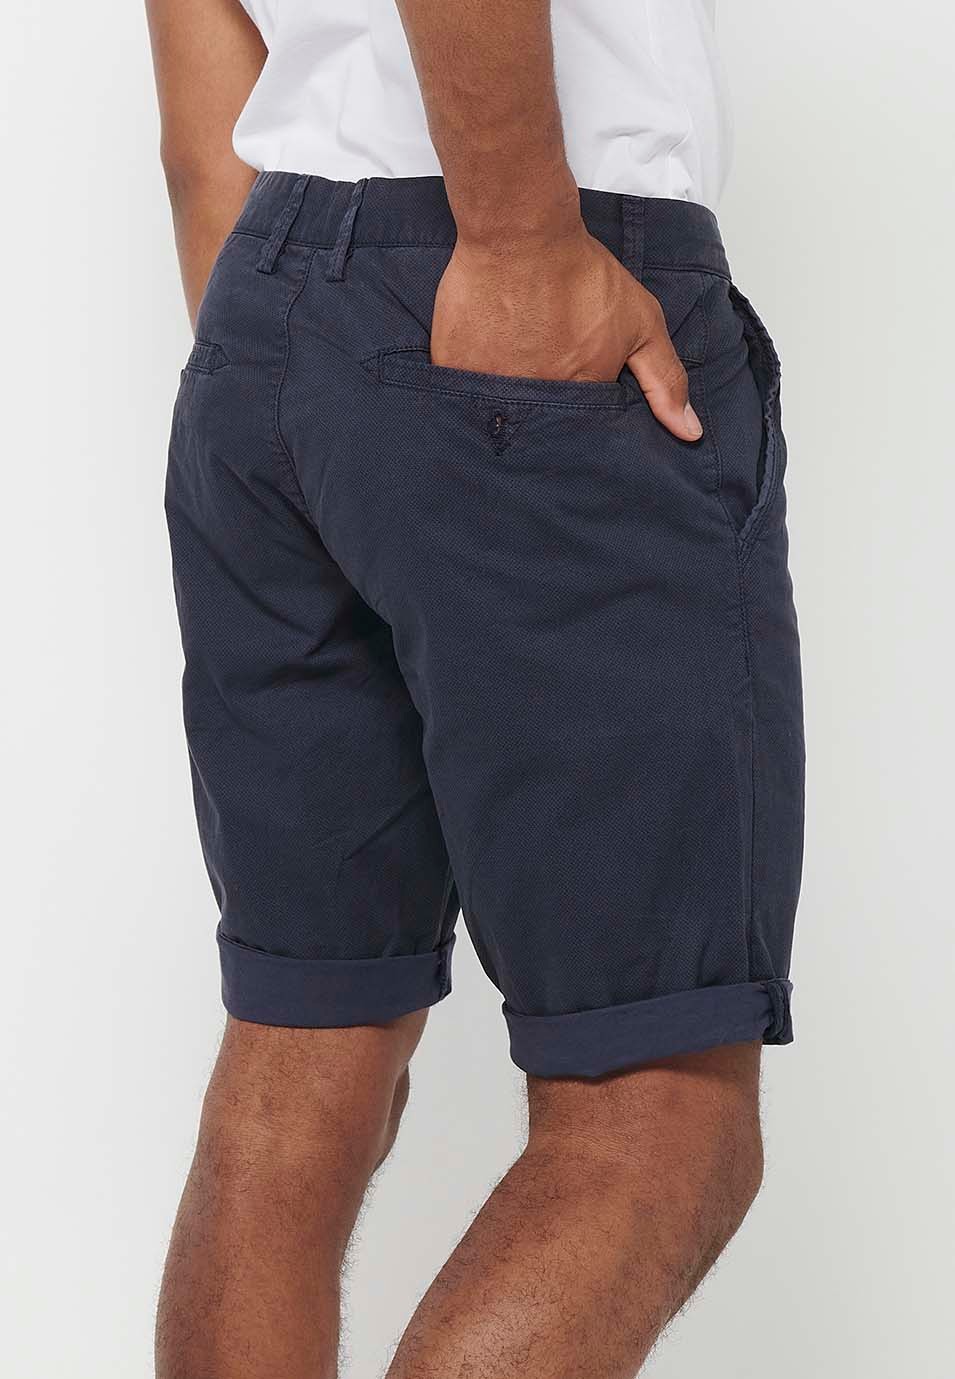 Bermuda Chino shorts with turn-up finish with front zipper and button closure with four pockets in Navy Color for Men 5